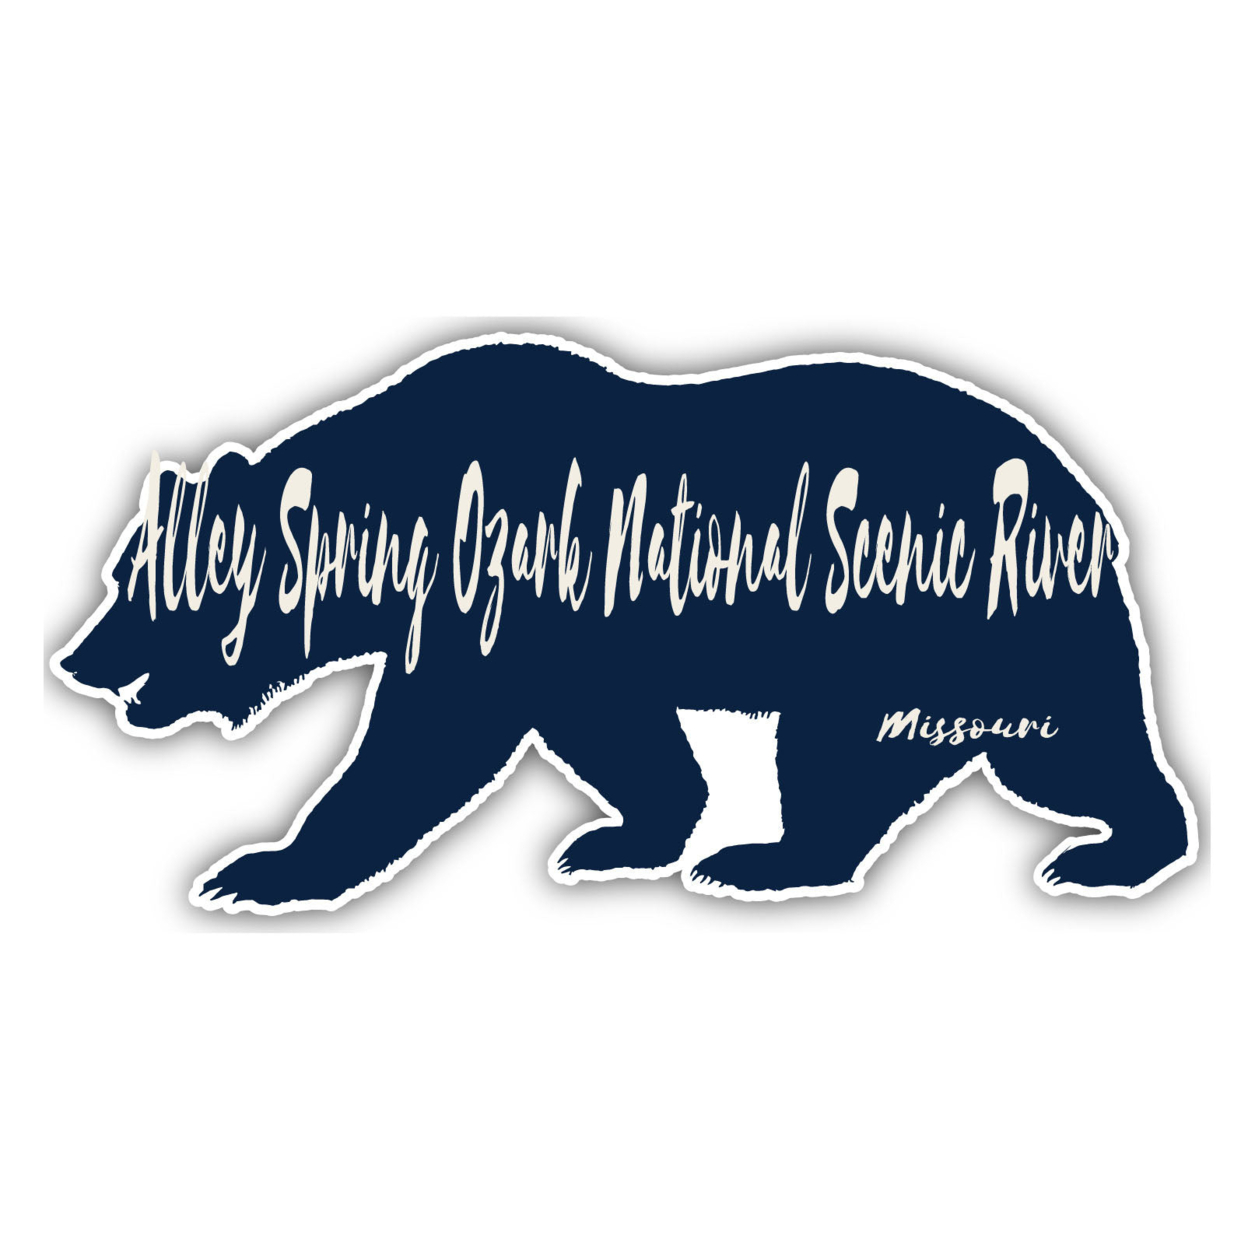 Alley Spring Ozark National Scenic River Missouri Souvenir Decorative Stickers (Choose Theme And Size) - 4-Pack, 10-Inch, Bear